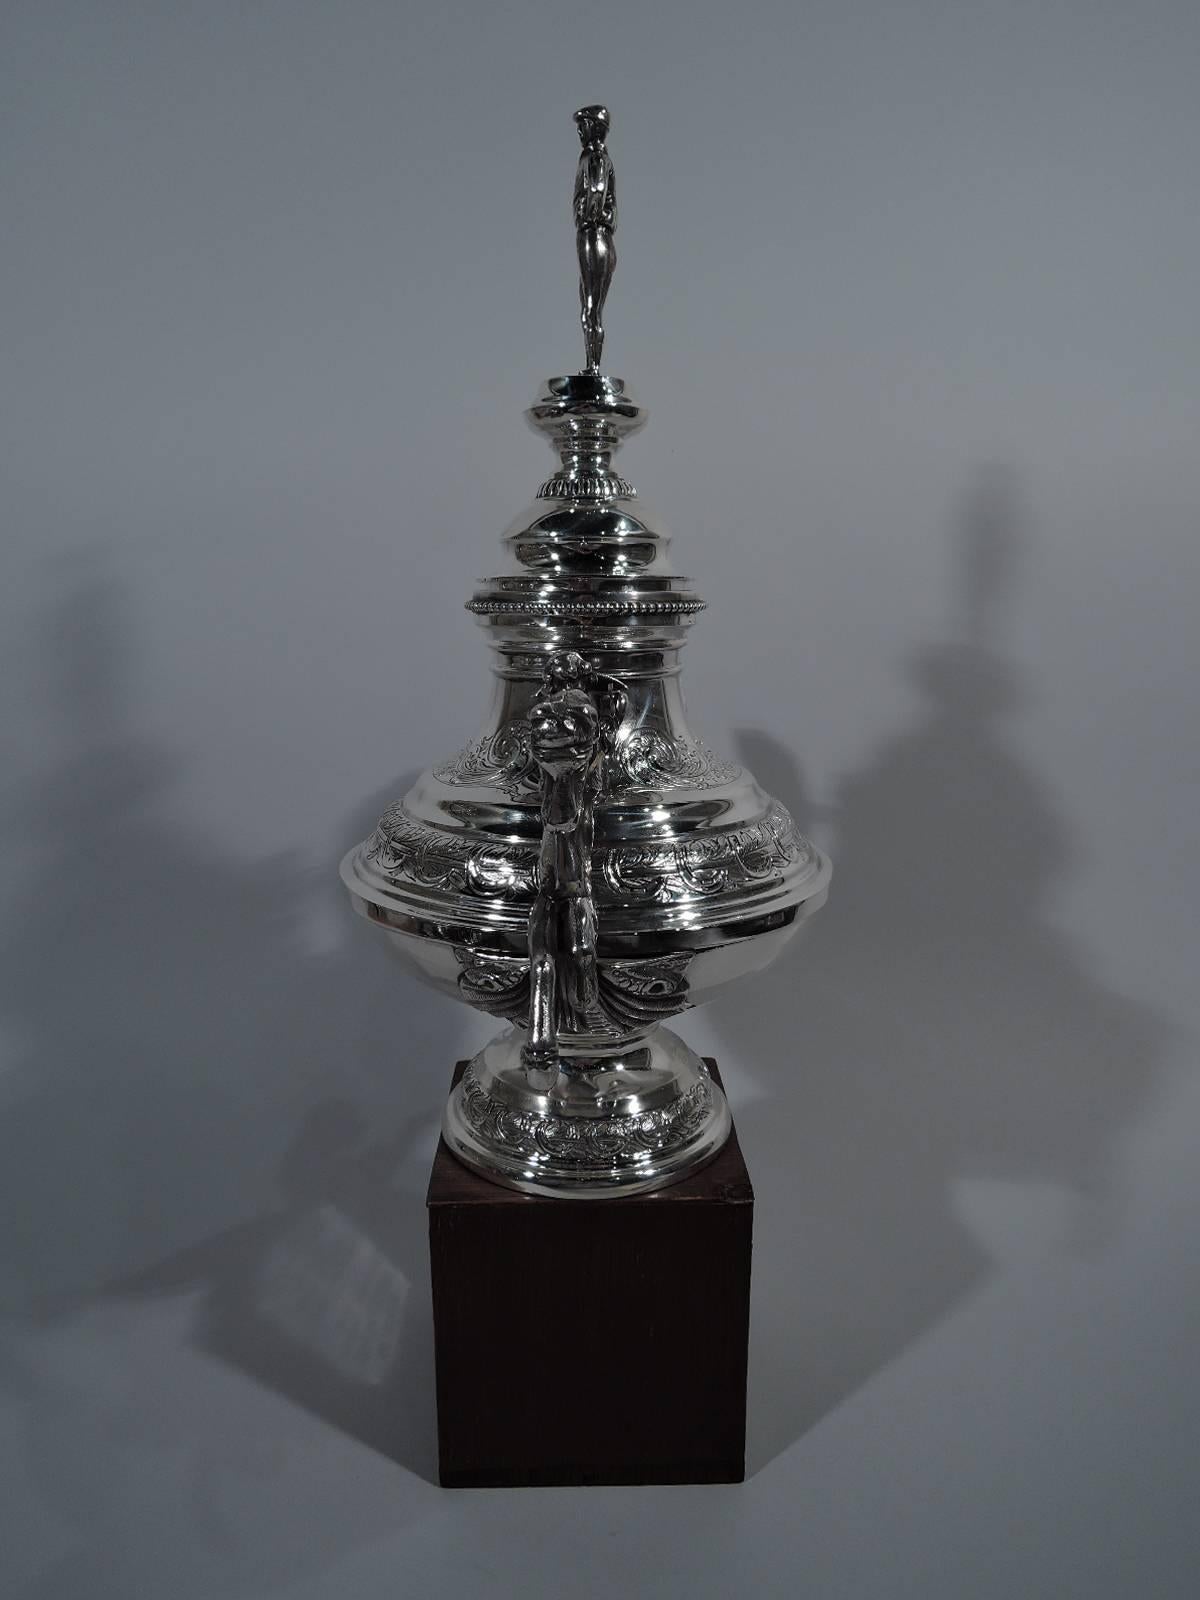 American sterling silver covered trophy. Bellied vase on domed foot. Double-domed foot. Chased leaf-and-horseshow garlands and floral and foliate-scrolled ornament. Beading and gadrooning. Mounted to sides are cast equestrian figures: A surging